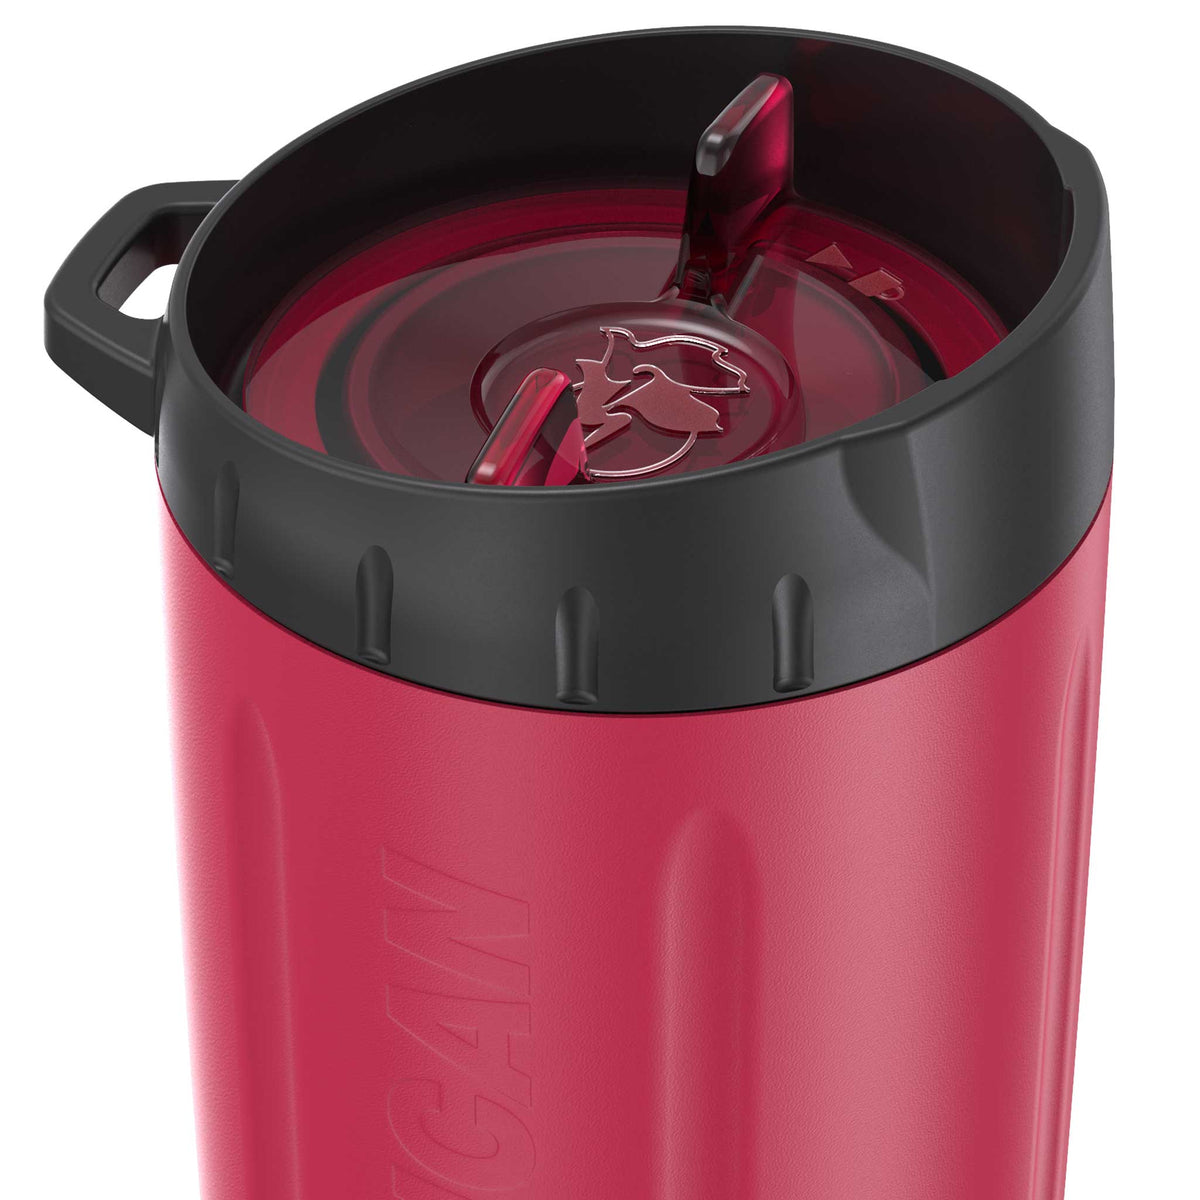 Pelican 22oz dayventure tumbler cup close up red